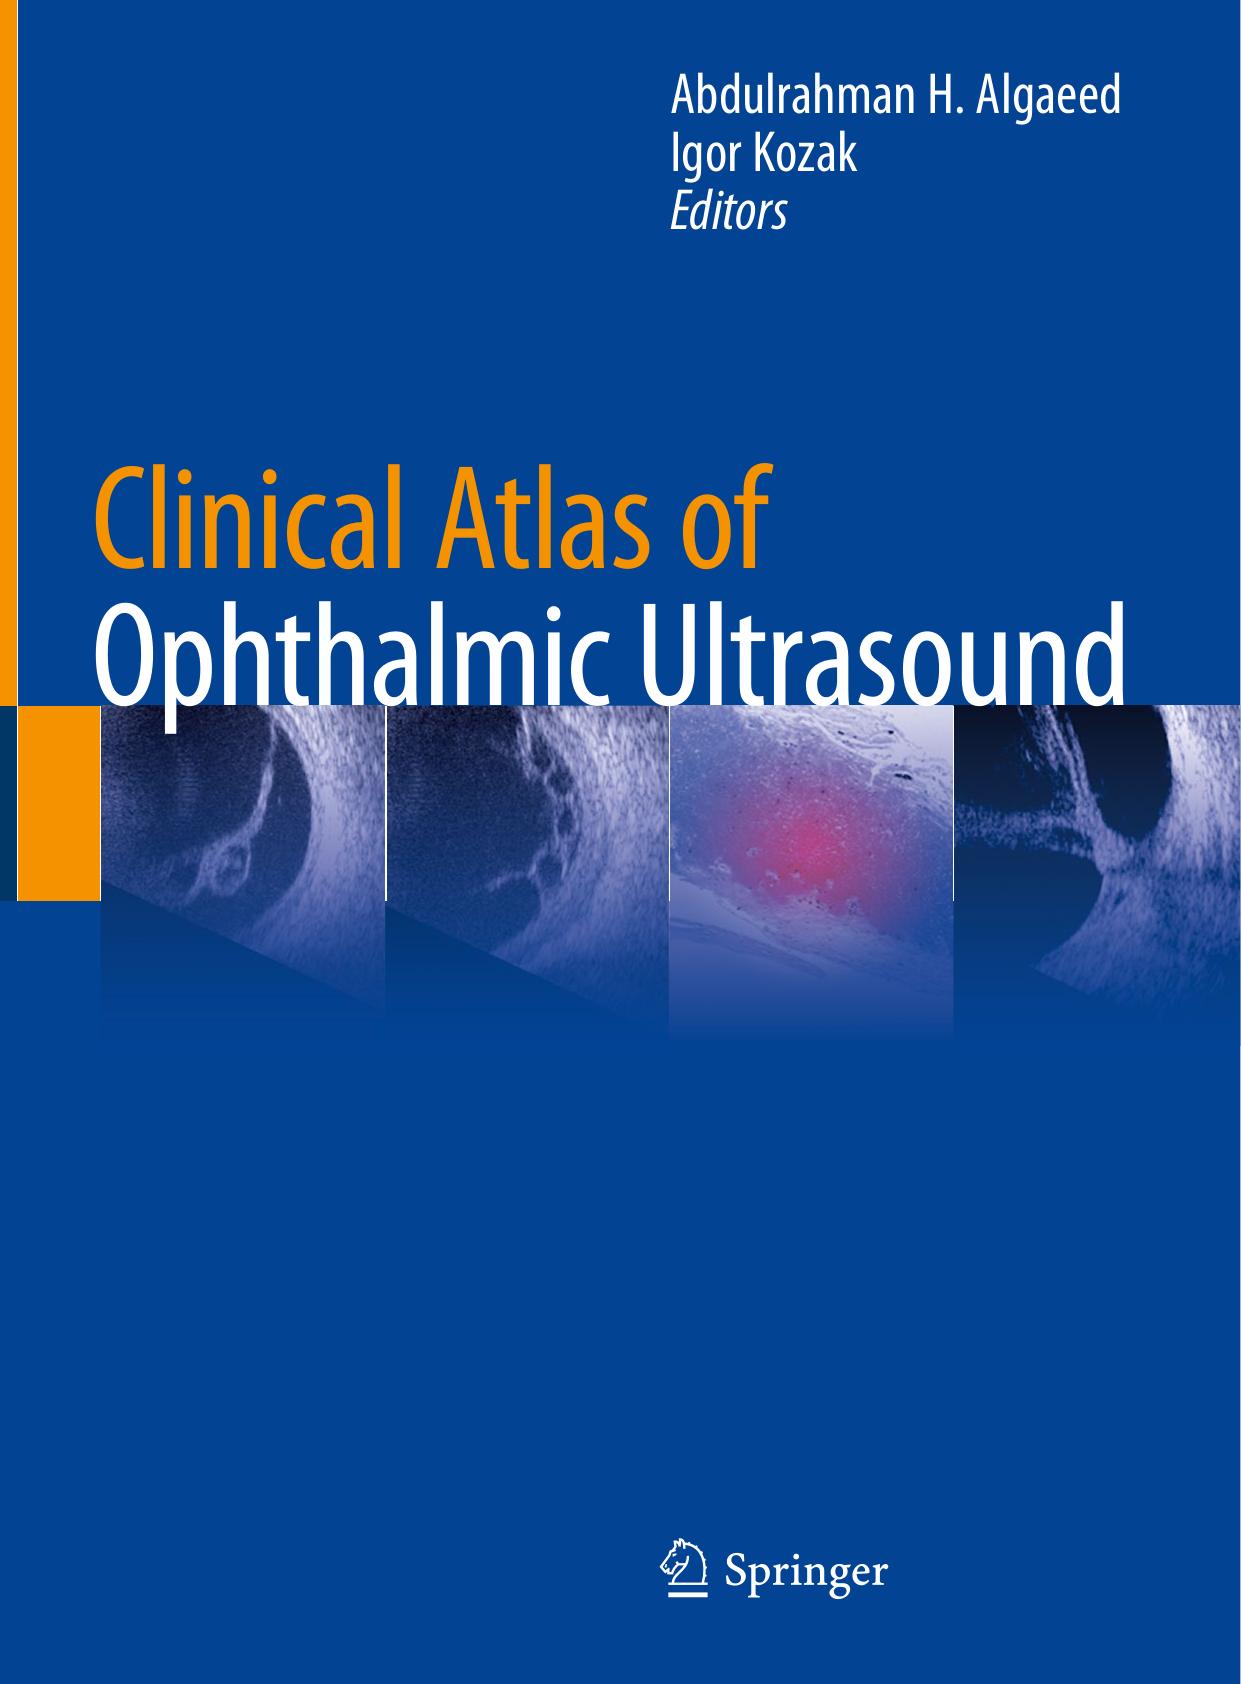 Clinical Atlas of Ophthalmic Ultrasound-Springer International Publishing (2019)